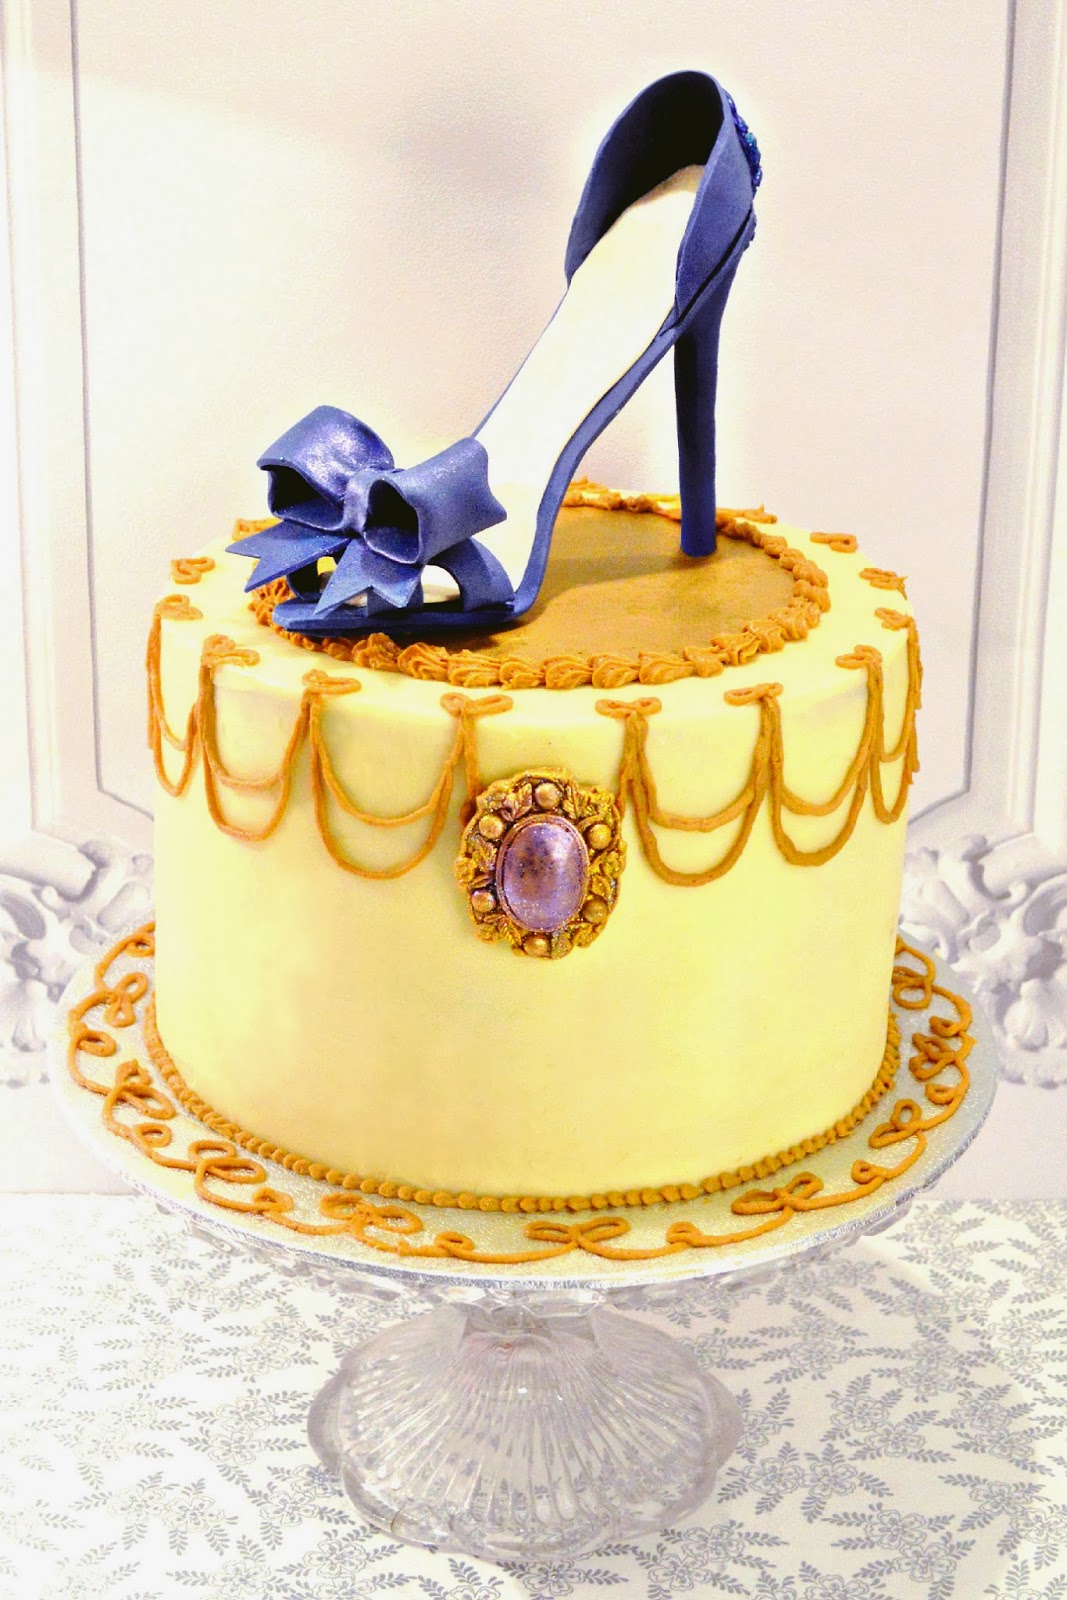 Caketastic - High heels Cake... Happy Birthday Layla M Dewji.. awesome cake  for an awesome person | Facebook